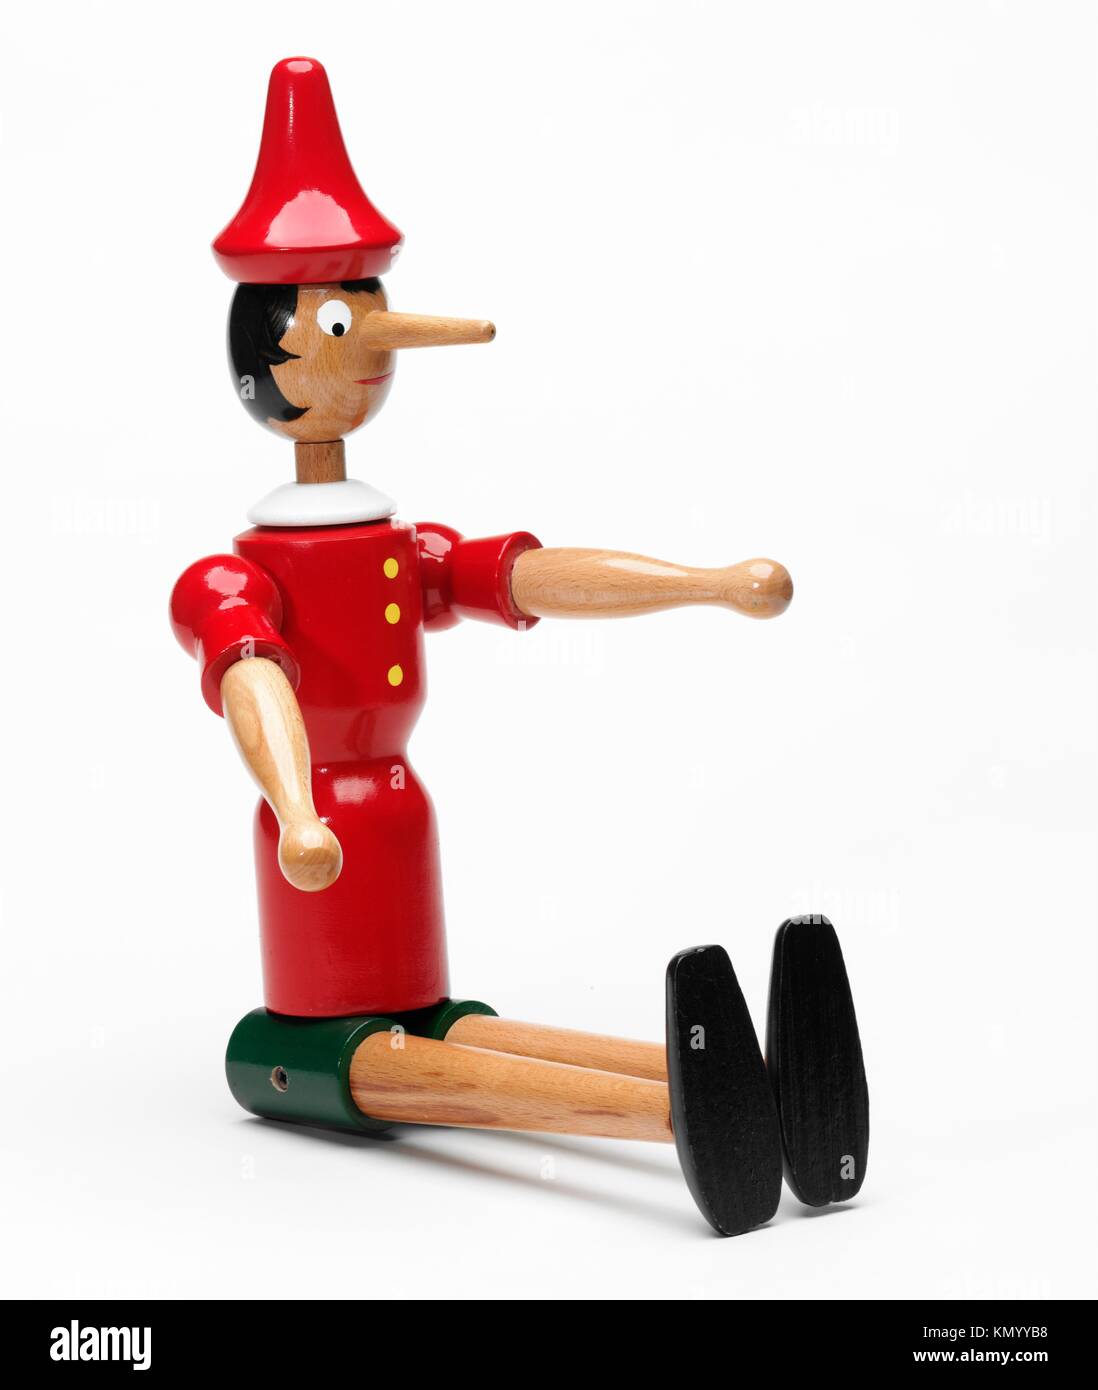 Pinocchio Cut Out Stock Images & Pictures - Alamy